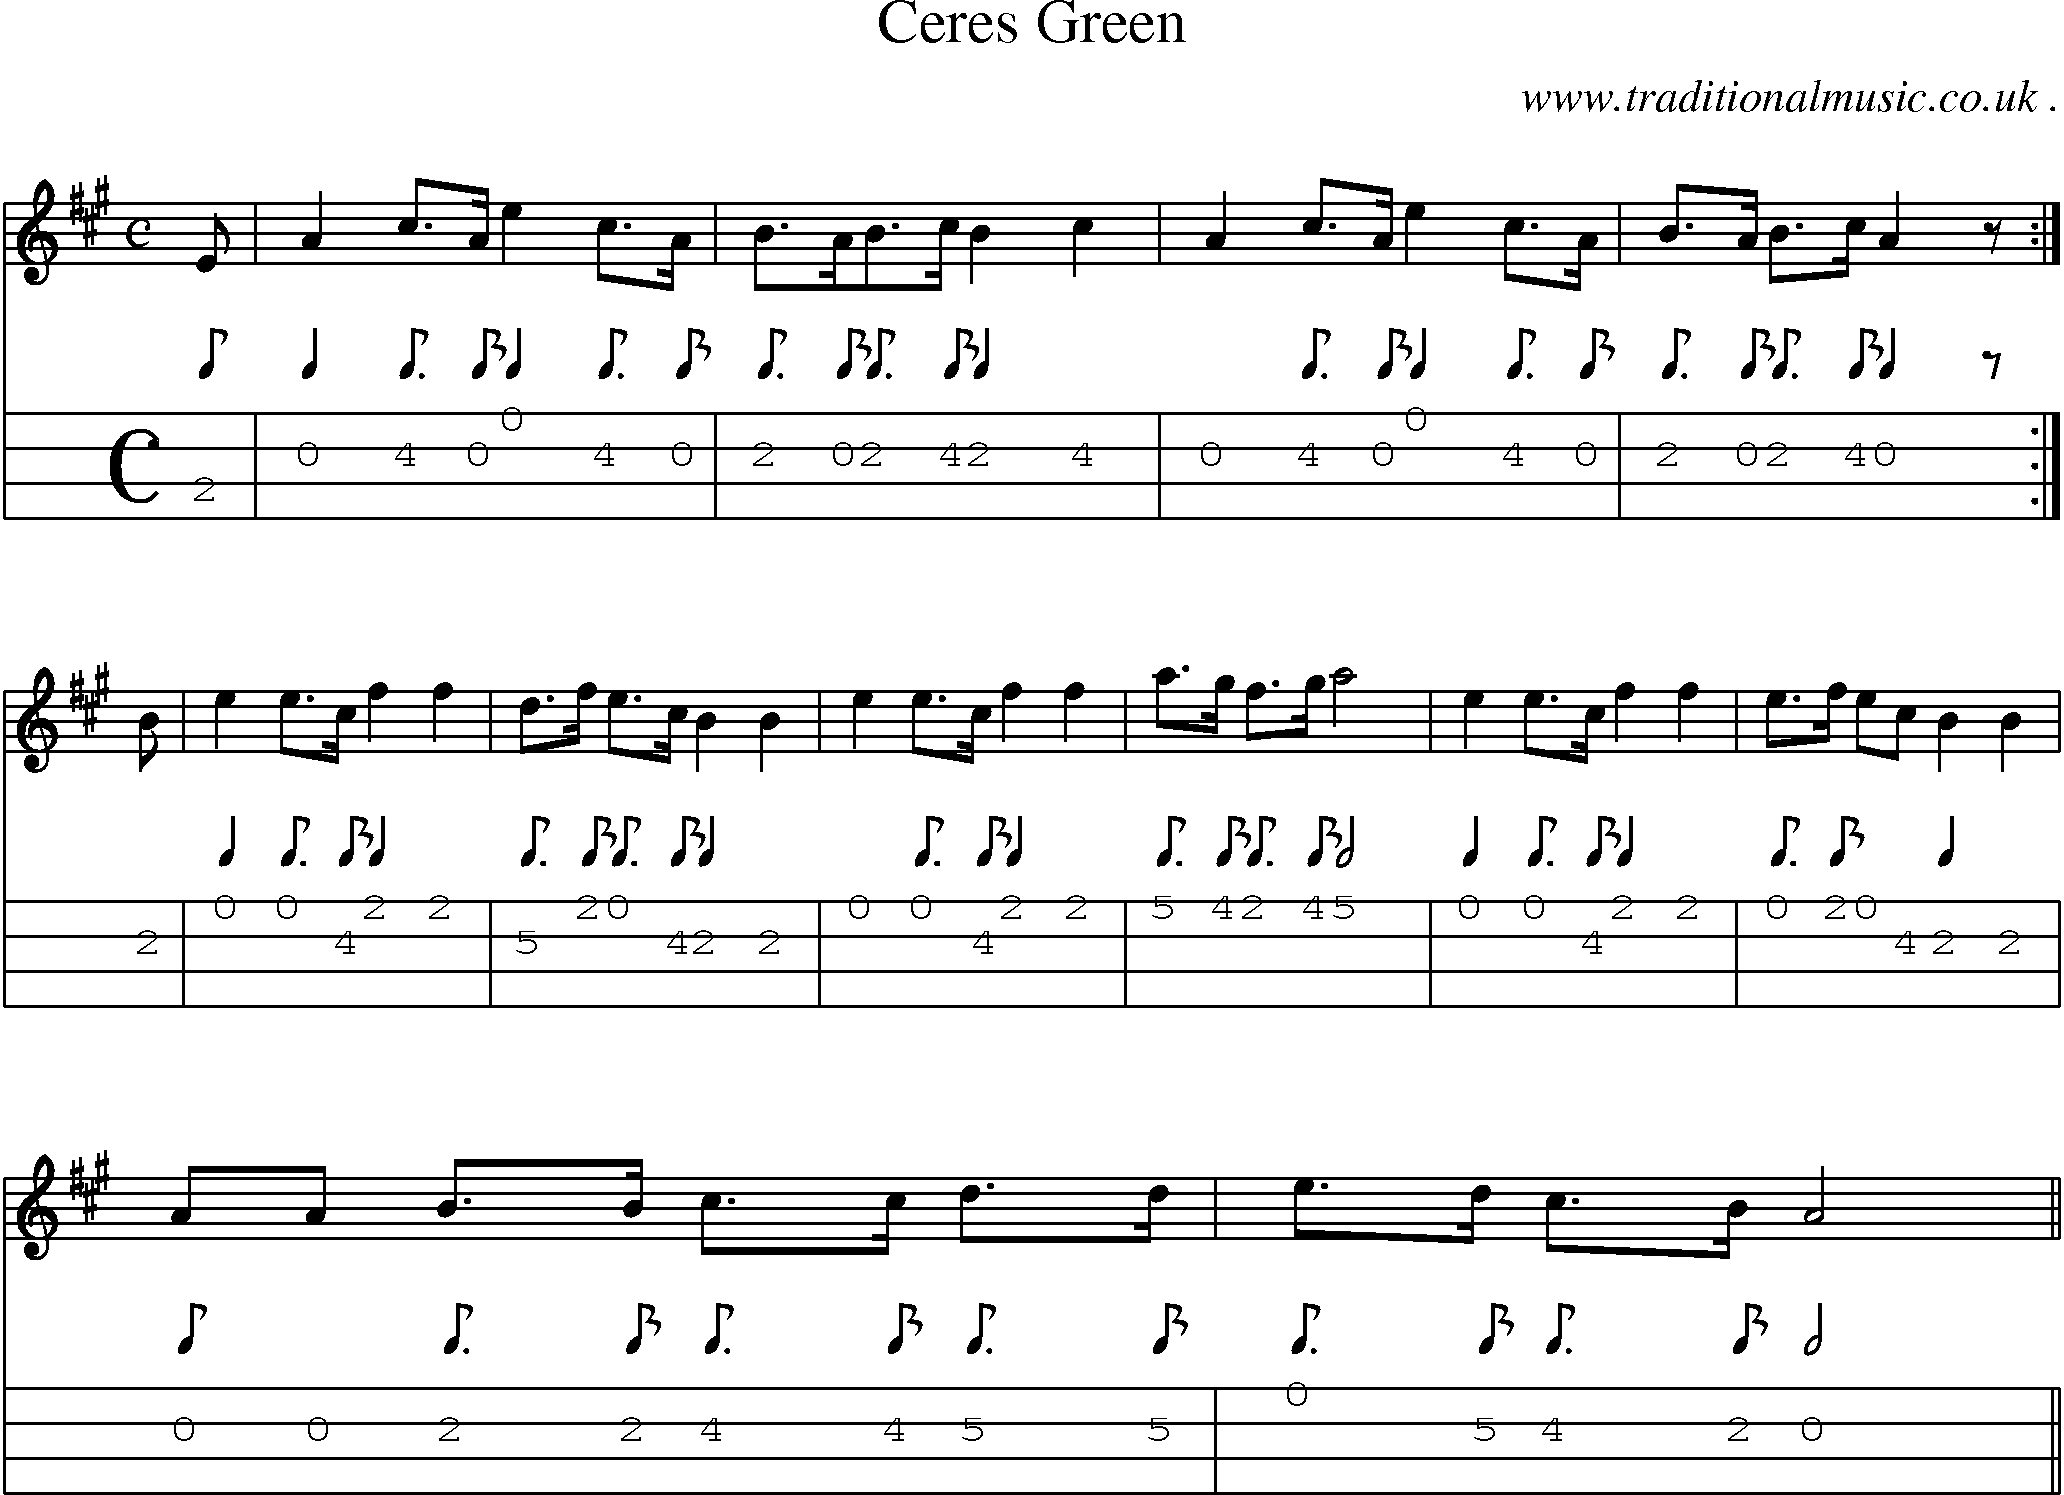 Sheet-music  score, Chords and Mandolin Tabs for Ceres Green